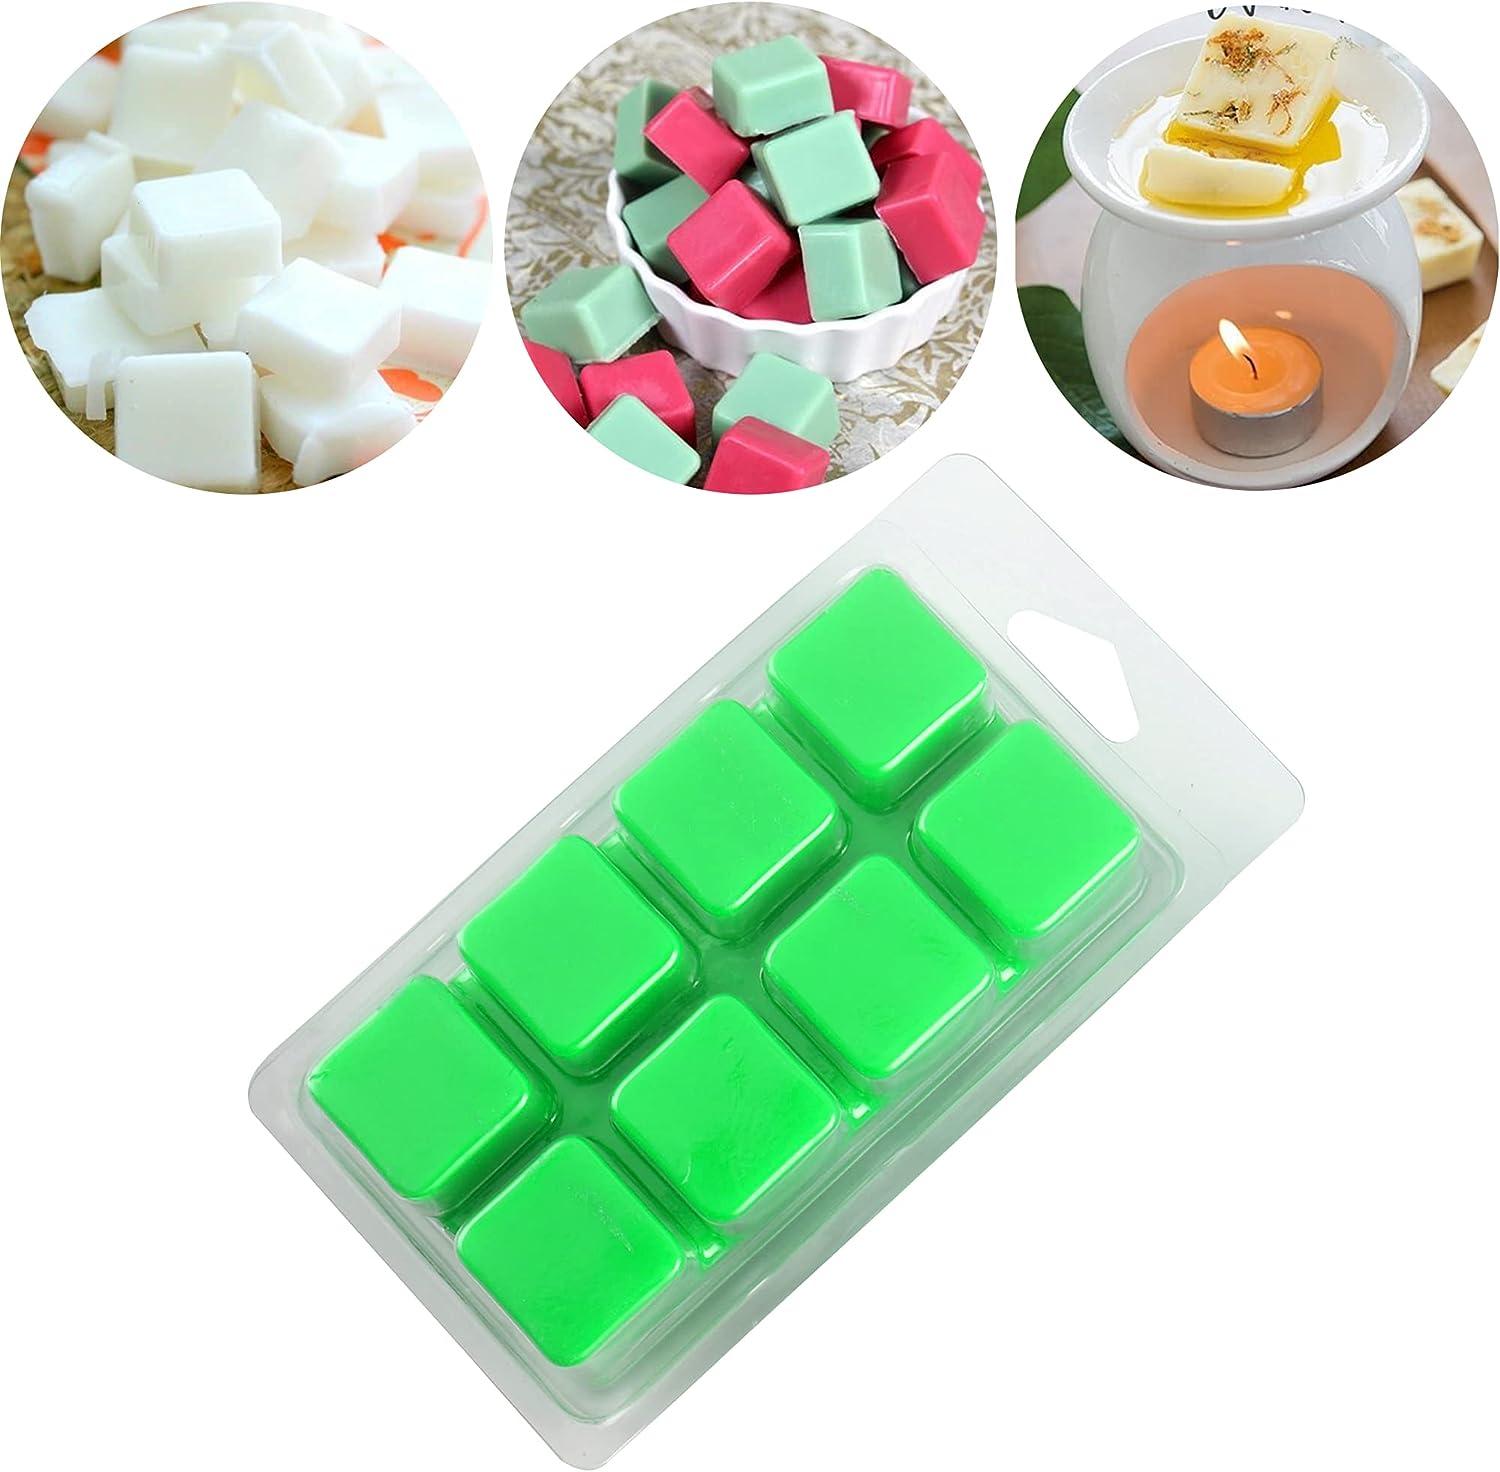 Wholesale Plastic Clear Clamshell Wax Melt Mold Containers for Candles -  China Wax Melt Mold, Clamshell for Candles